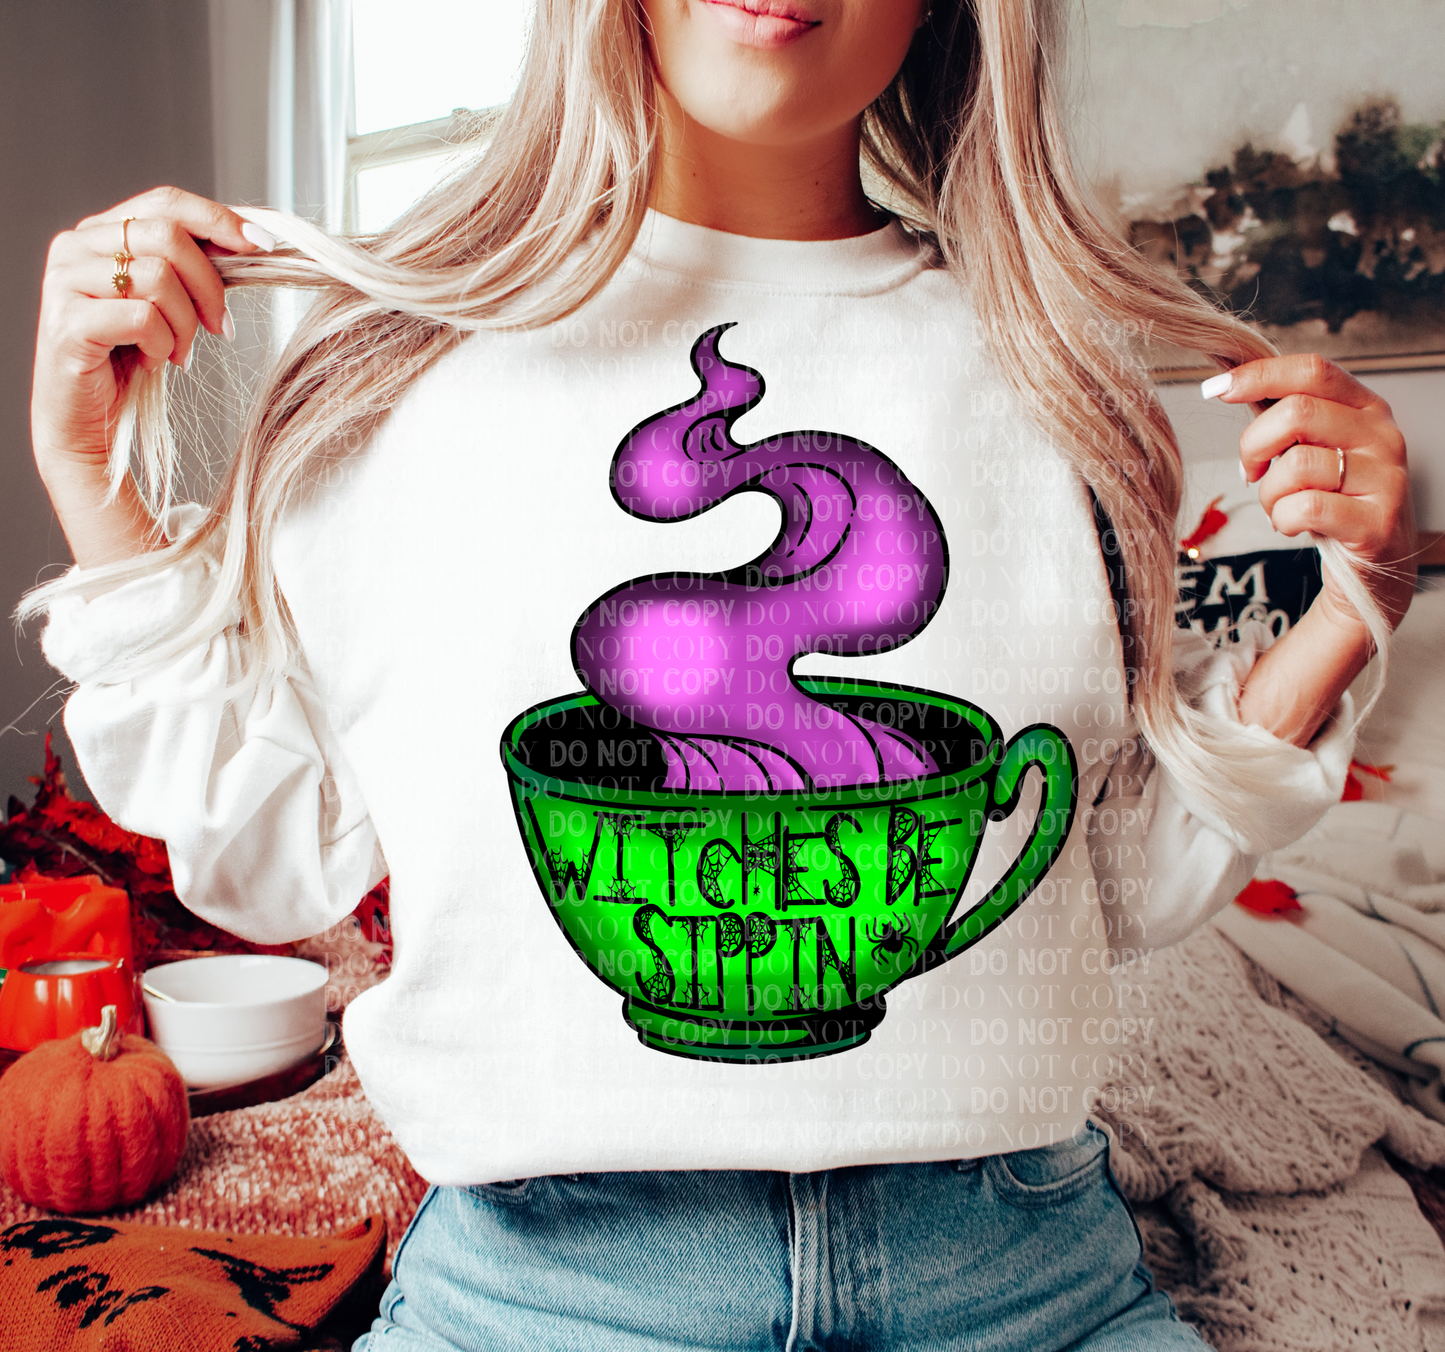 Witches Be Sippin’ Color Digital PNG